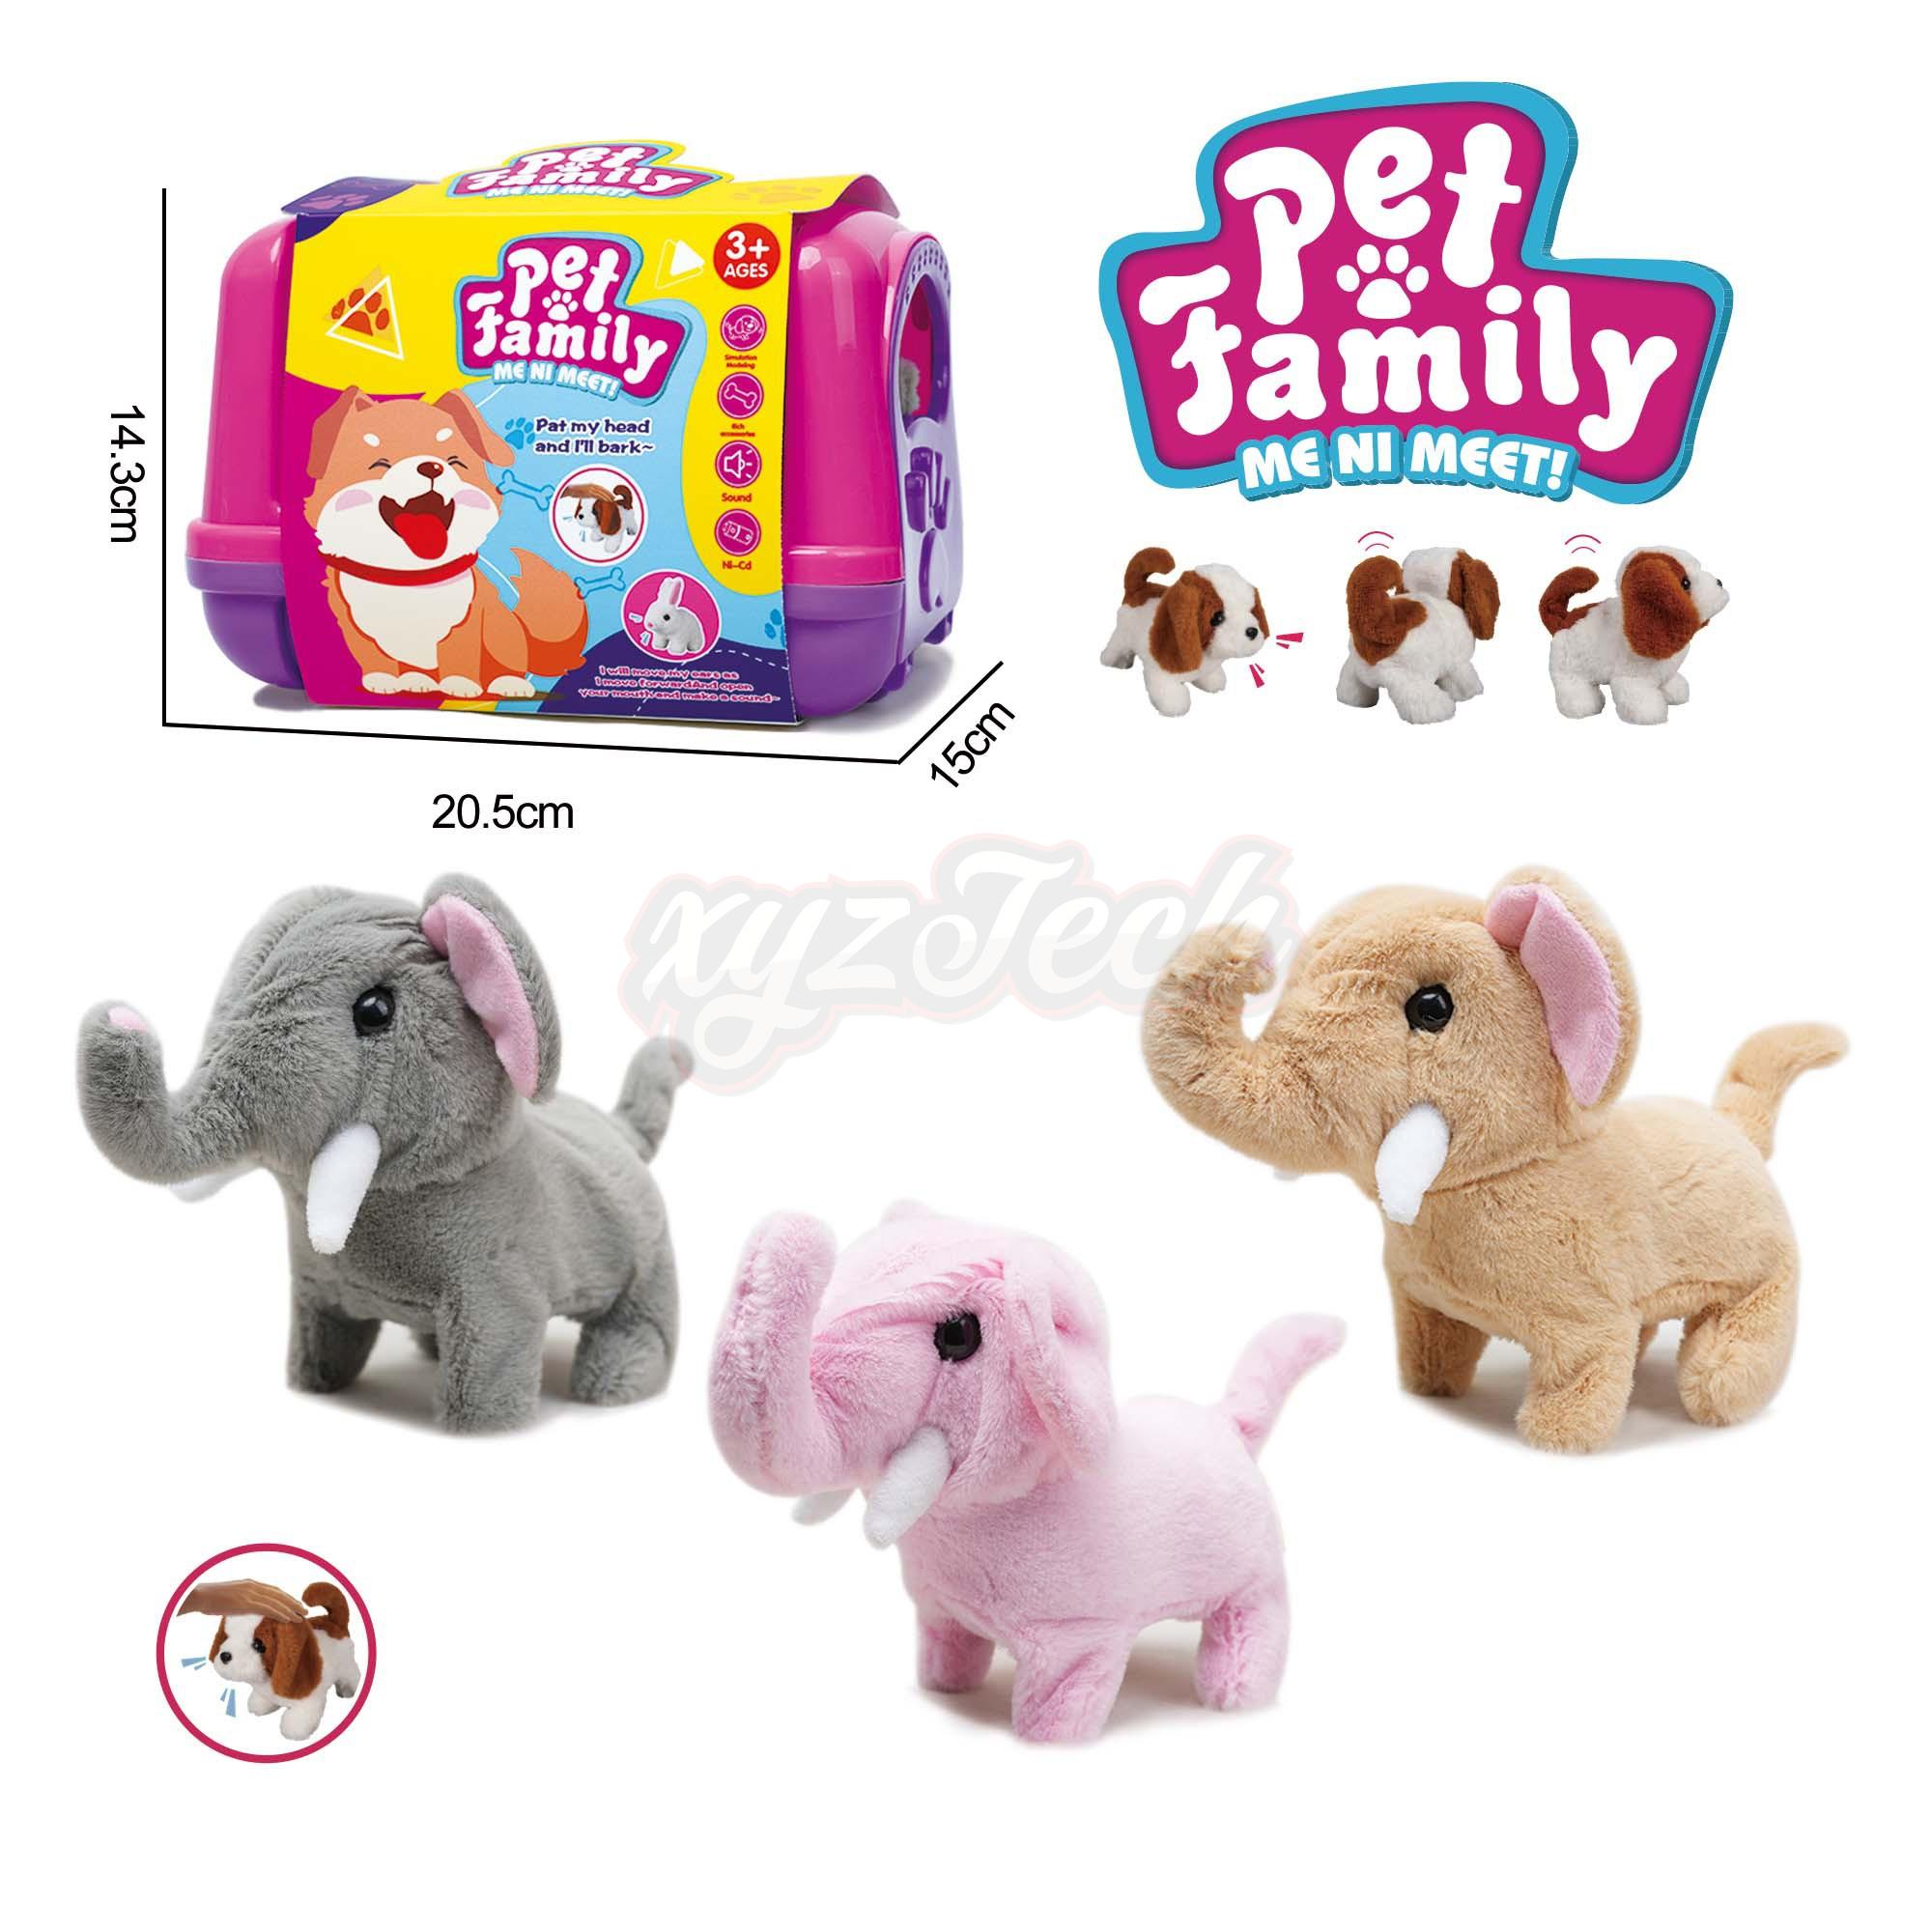 Electric plush walking elephant and carrying cage